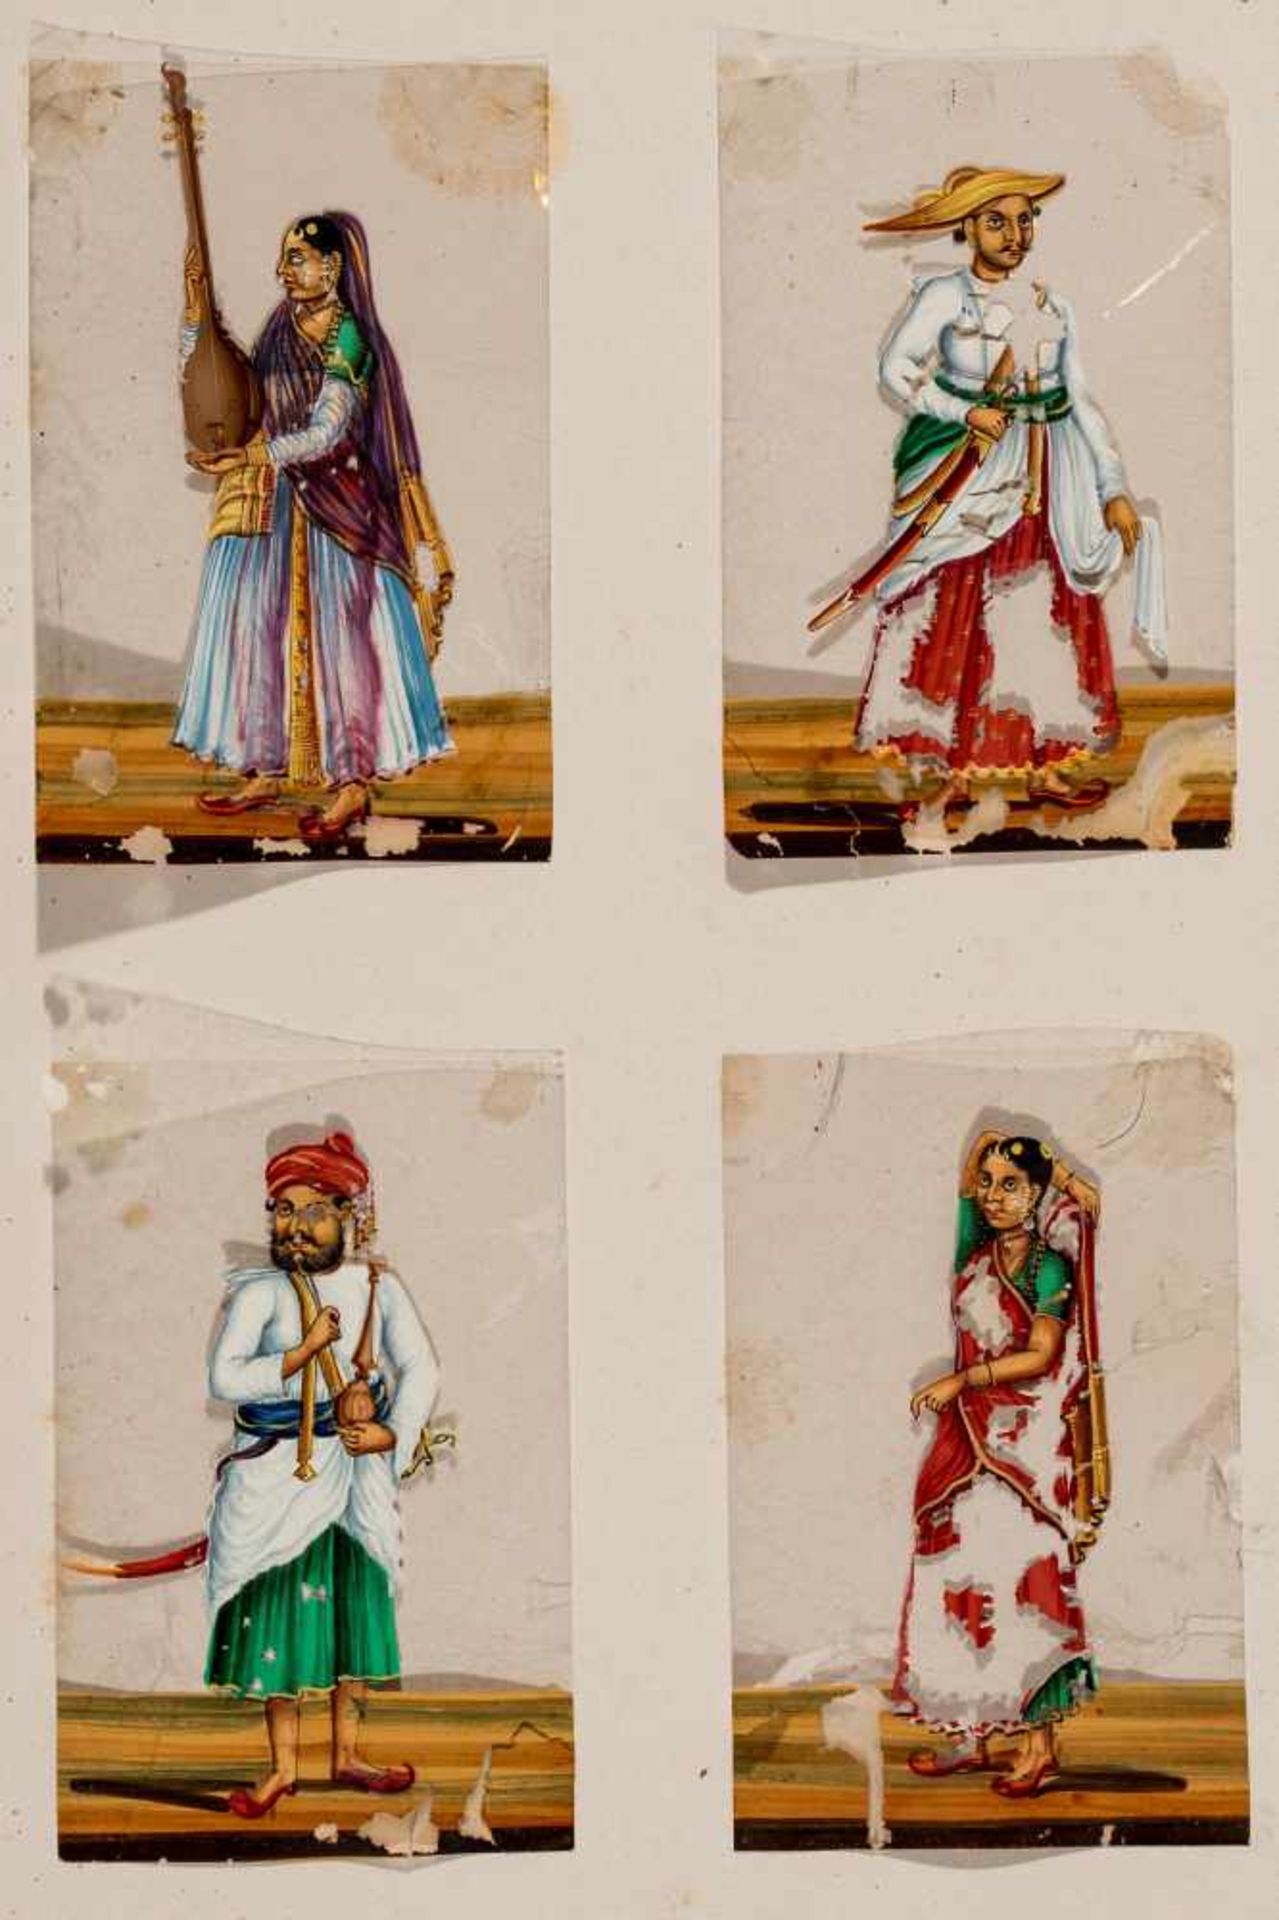 A GROUP OF 12 MINIATURE PORTRAITS ON CELLULOID – 1920sMiniature painting with colors on - Image 2 of 4